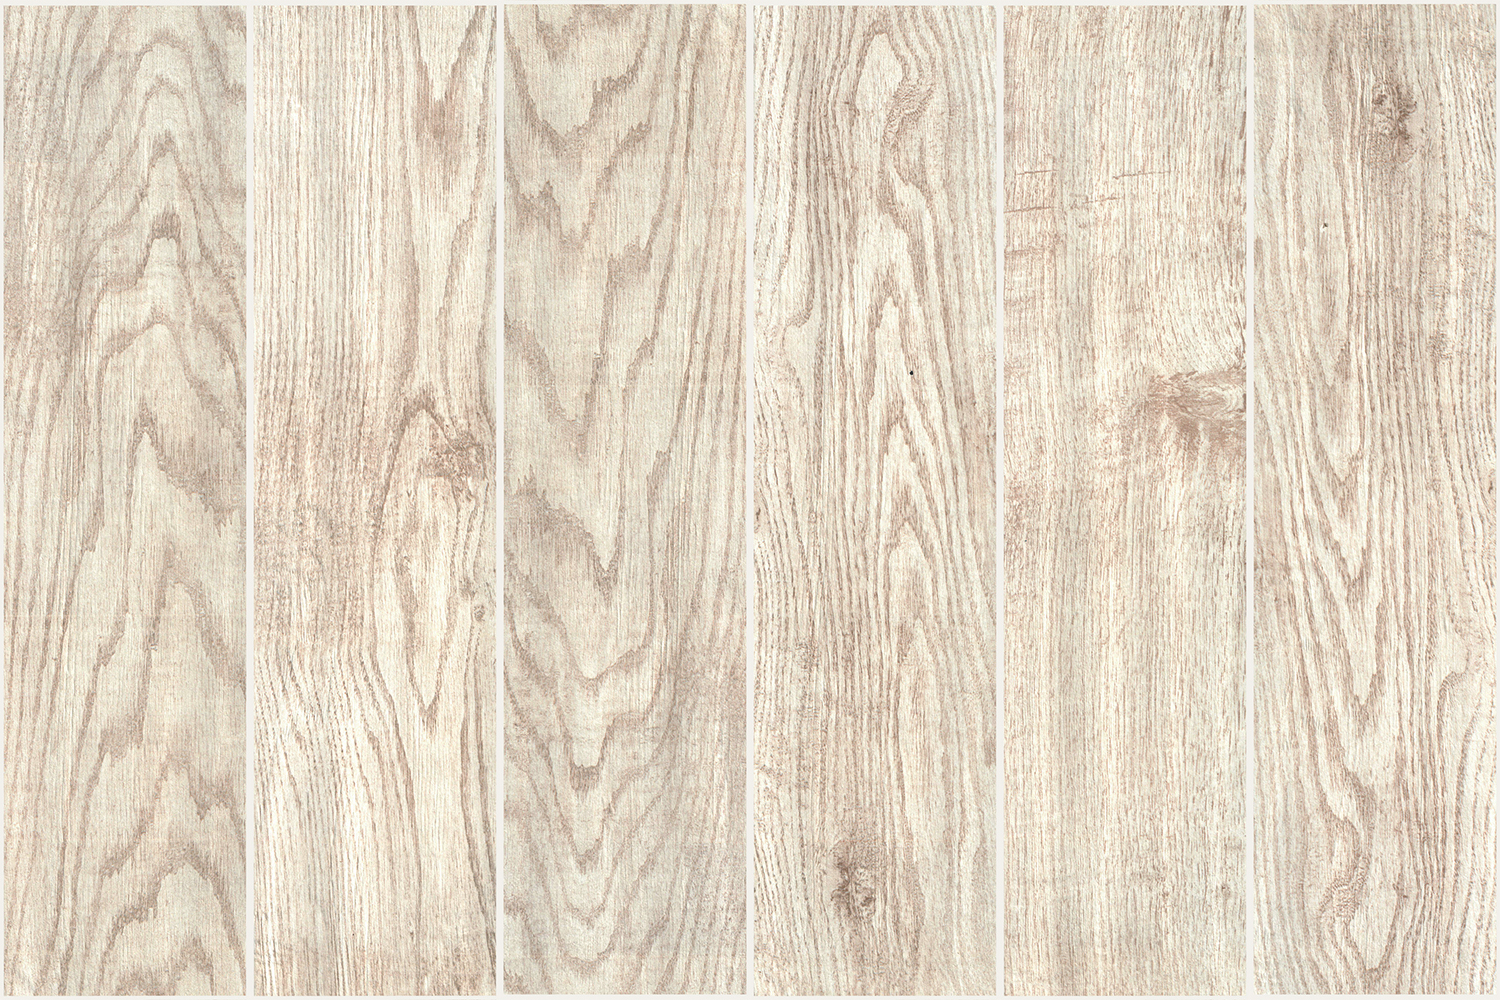 White Washed Wood Texture